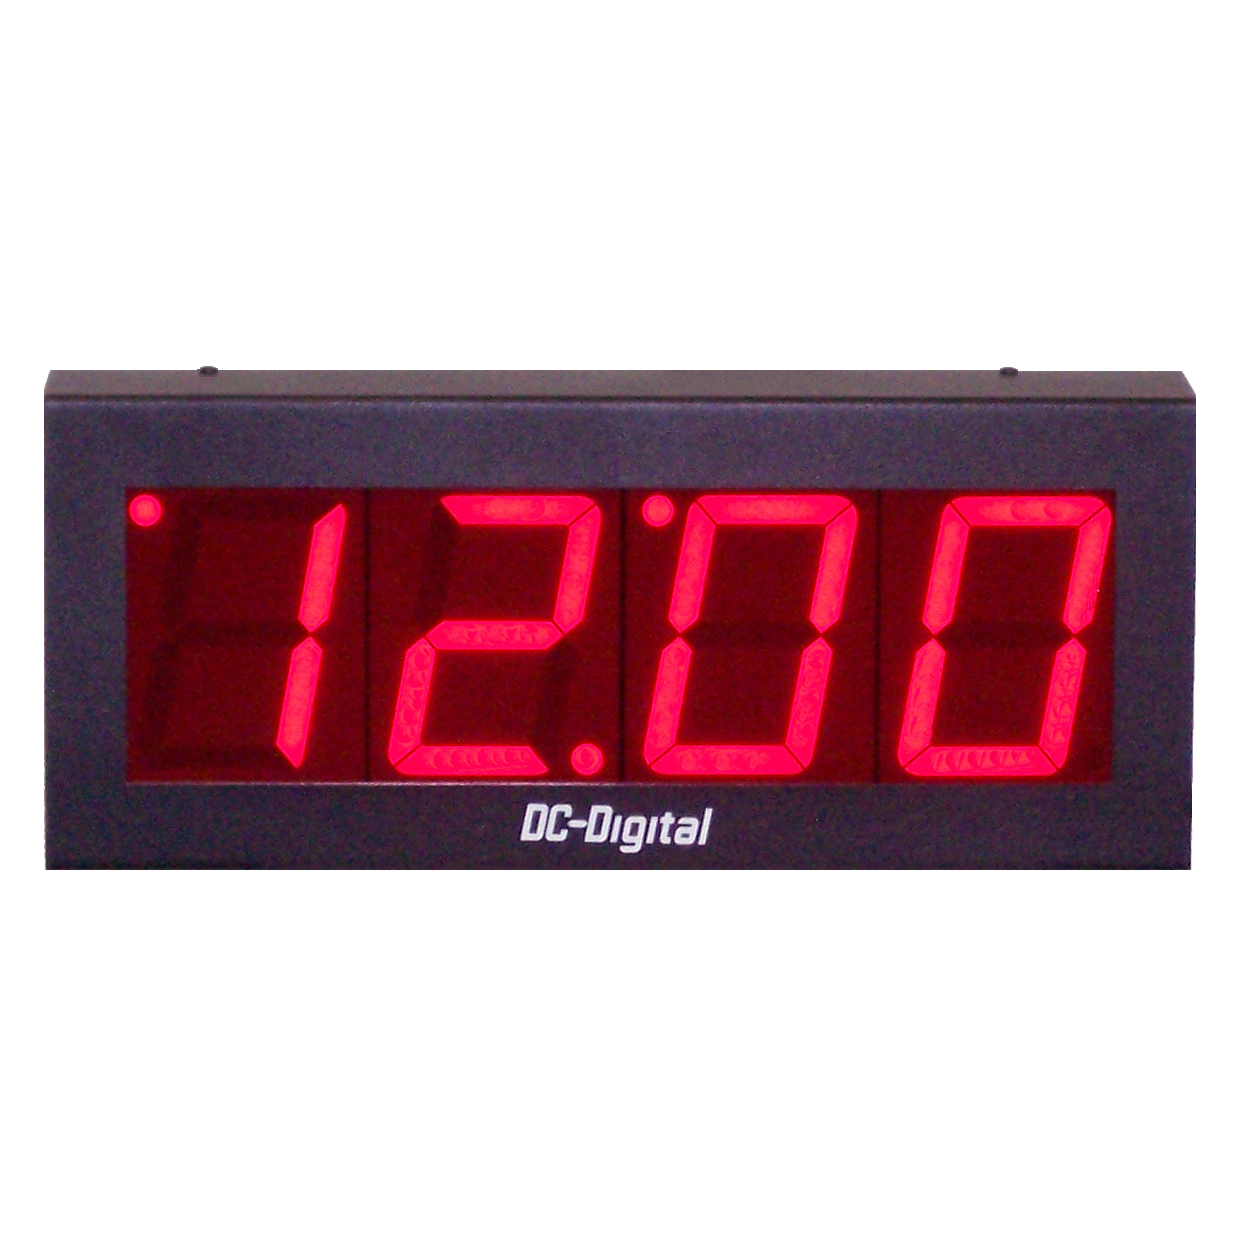 (DC-40N) 4.0 Inch LED, Network NTP Server Synchronized, Web Page Configurable, Atomic Digital Time of Day Clock